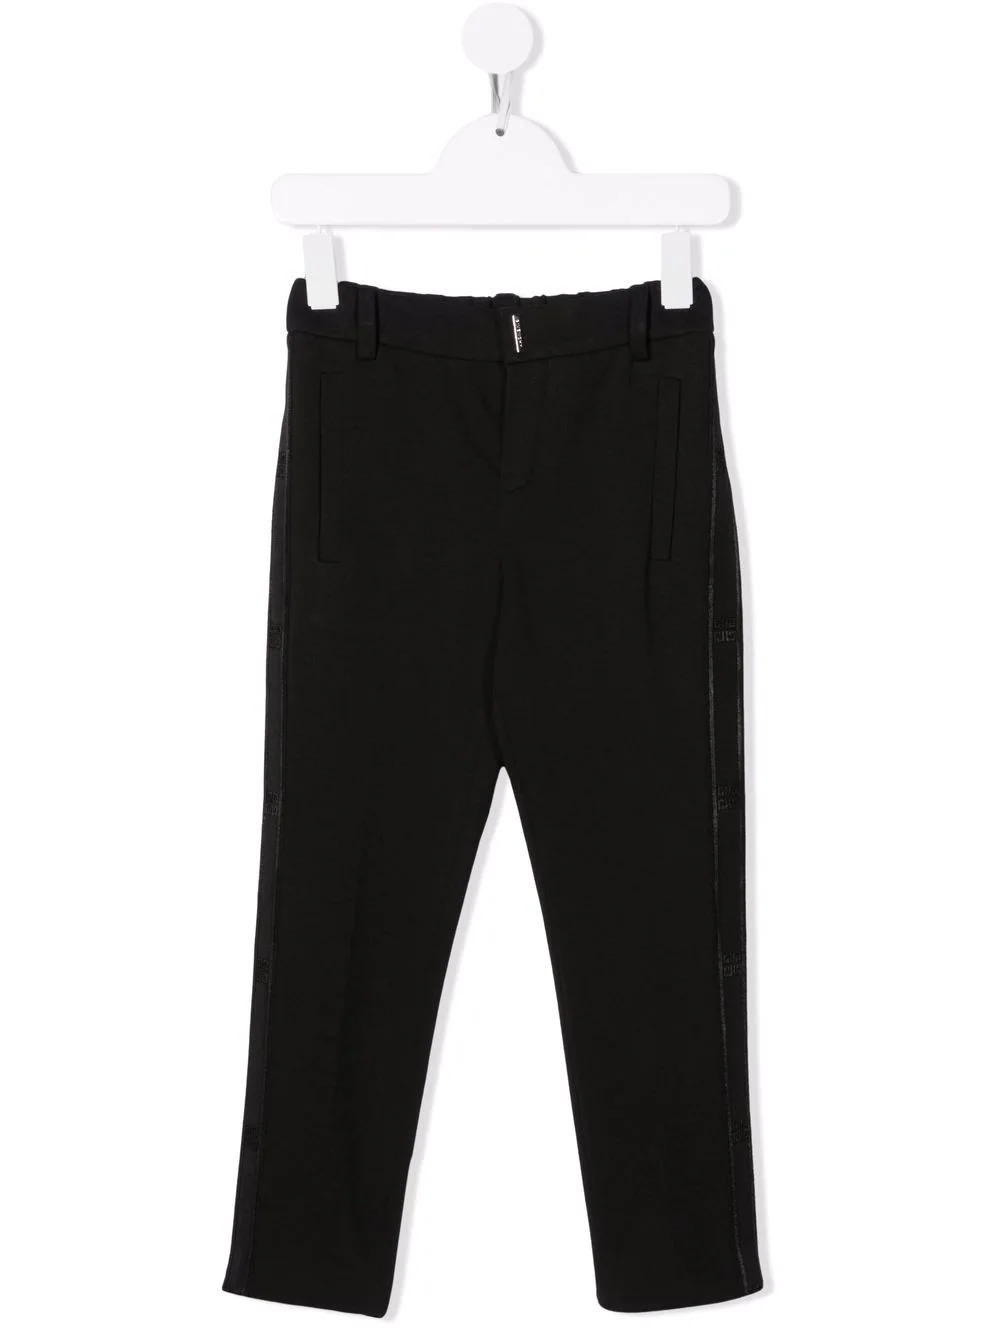 Kids Black Trousers With 4g Side Bands And Givenchy Metal Bar